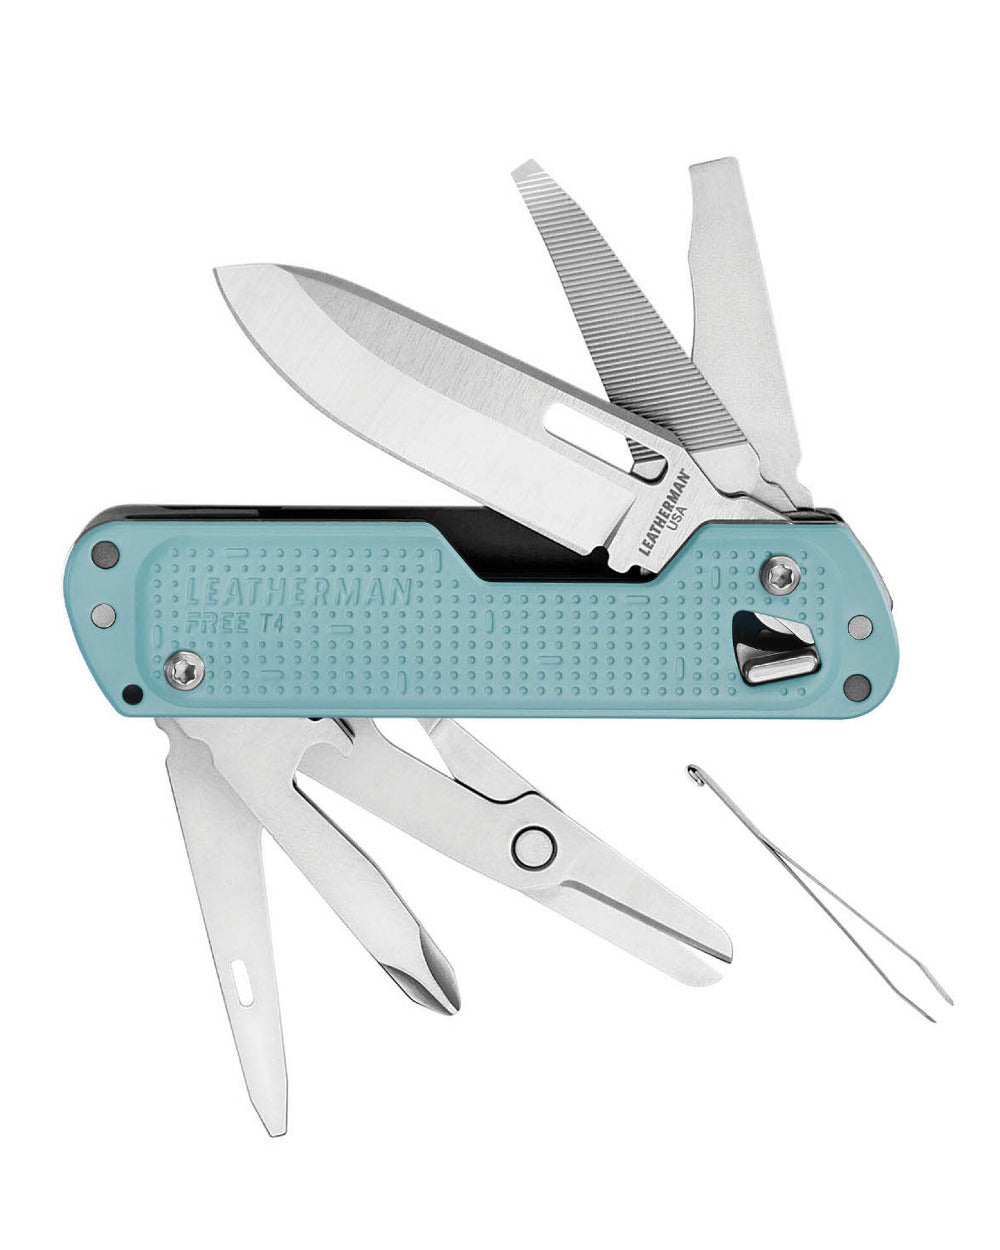 Arctic Coloured Leatherman Free T4 Multi-Tool On A White Background 